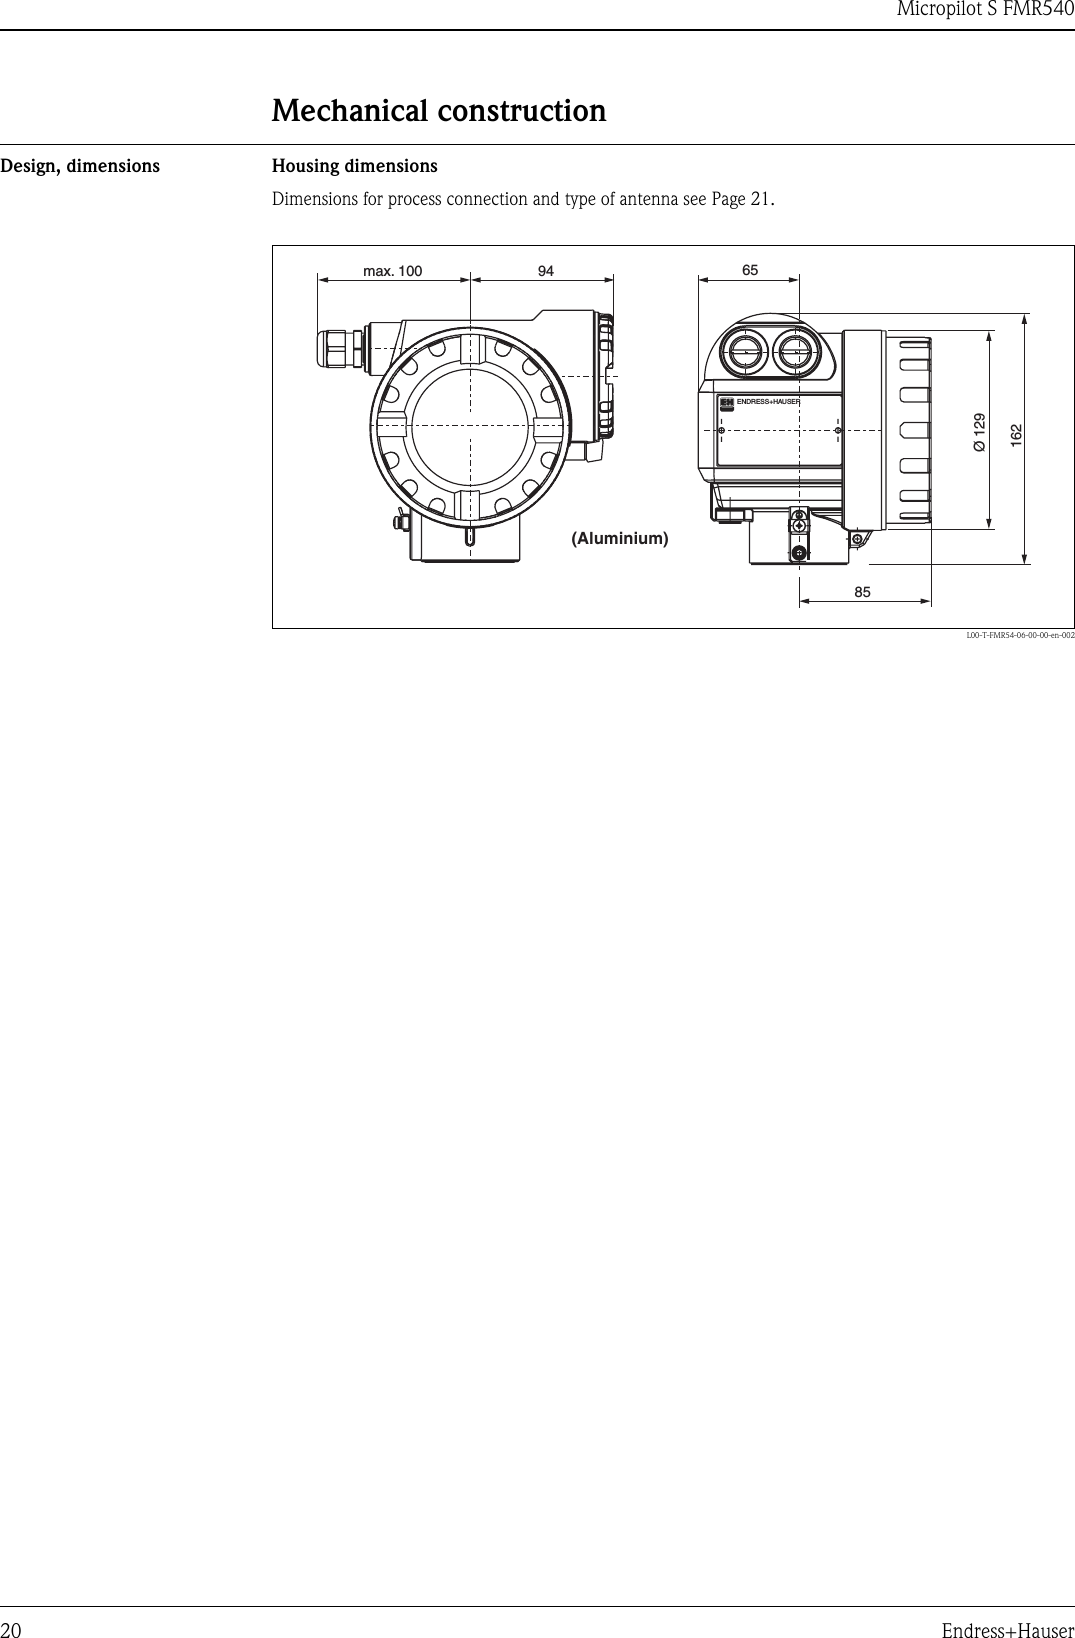 Micropilot S FMR54020 Endress+HauserMechanical constructionDesign, dimensions Housing dimensionsDimensions for process connection and type of antenna see Page 21.L00-T-FMR54-06-00-00-en-002ENDRESS+HAUSER8565162max. 100 94Ø 129(Aluminium)